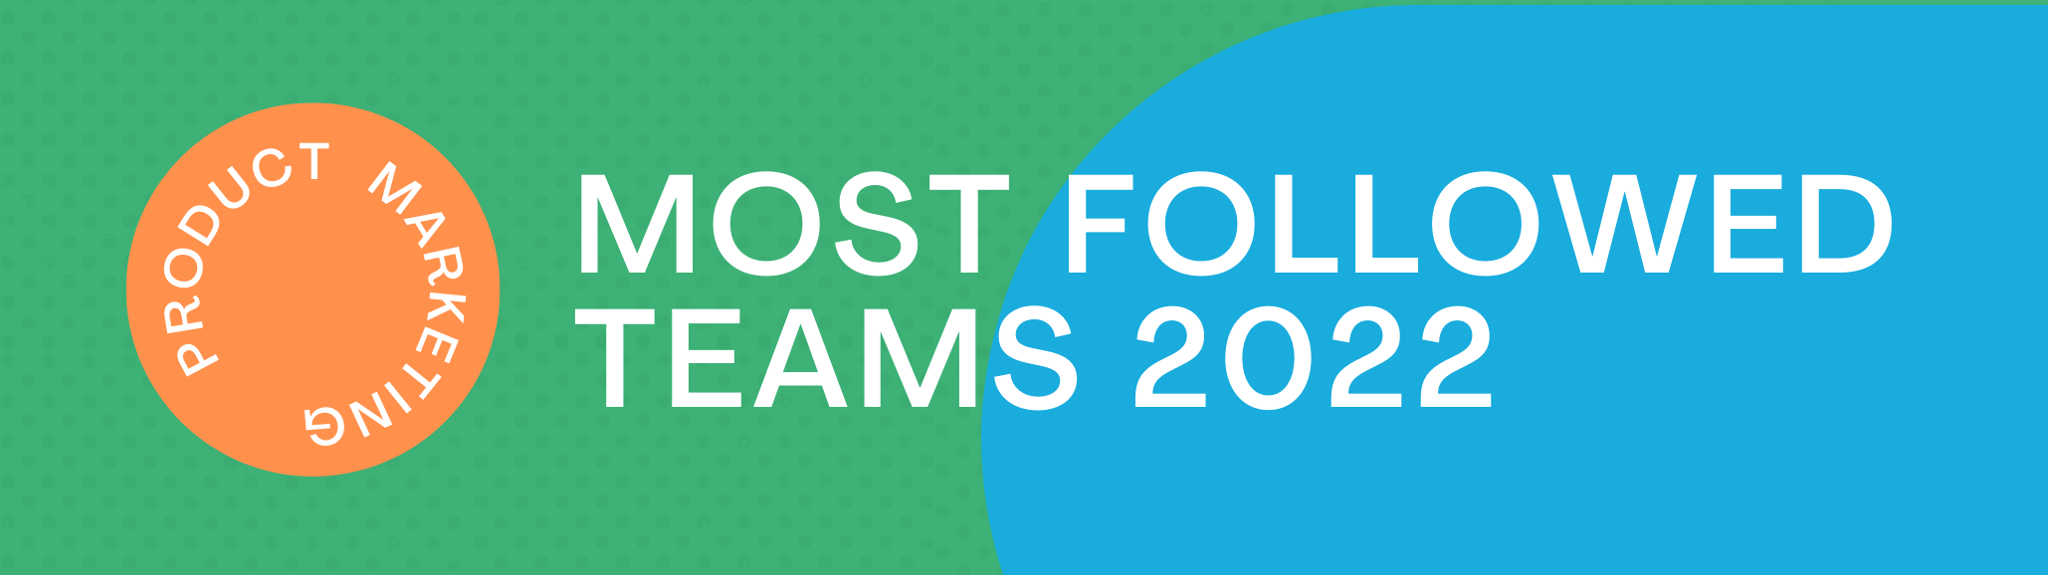 Most Followed Product Marketing Teams - 2022
The Top 25 Teams To Learn From And Work For To Develop Your Product Marketing Career